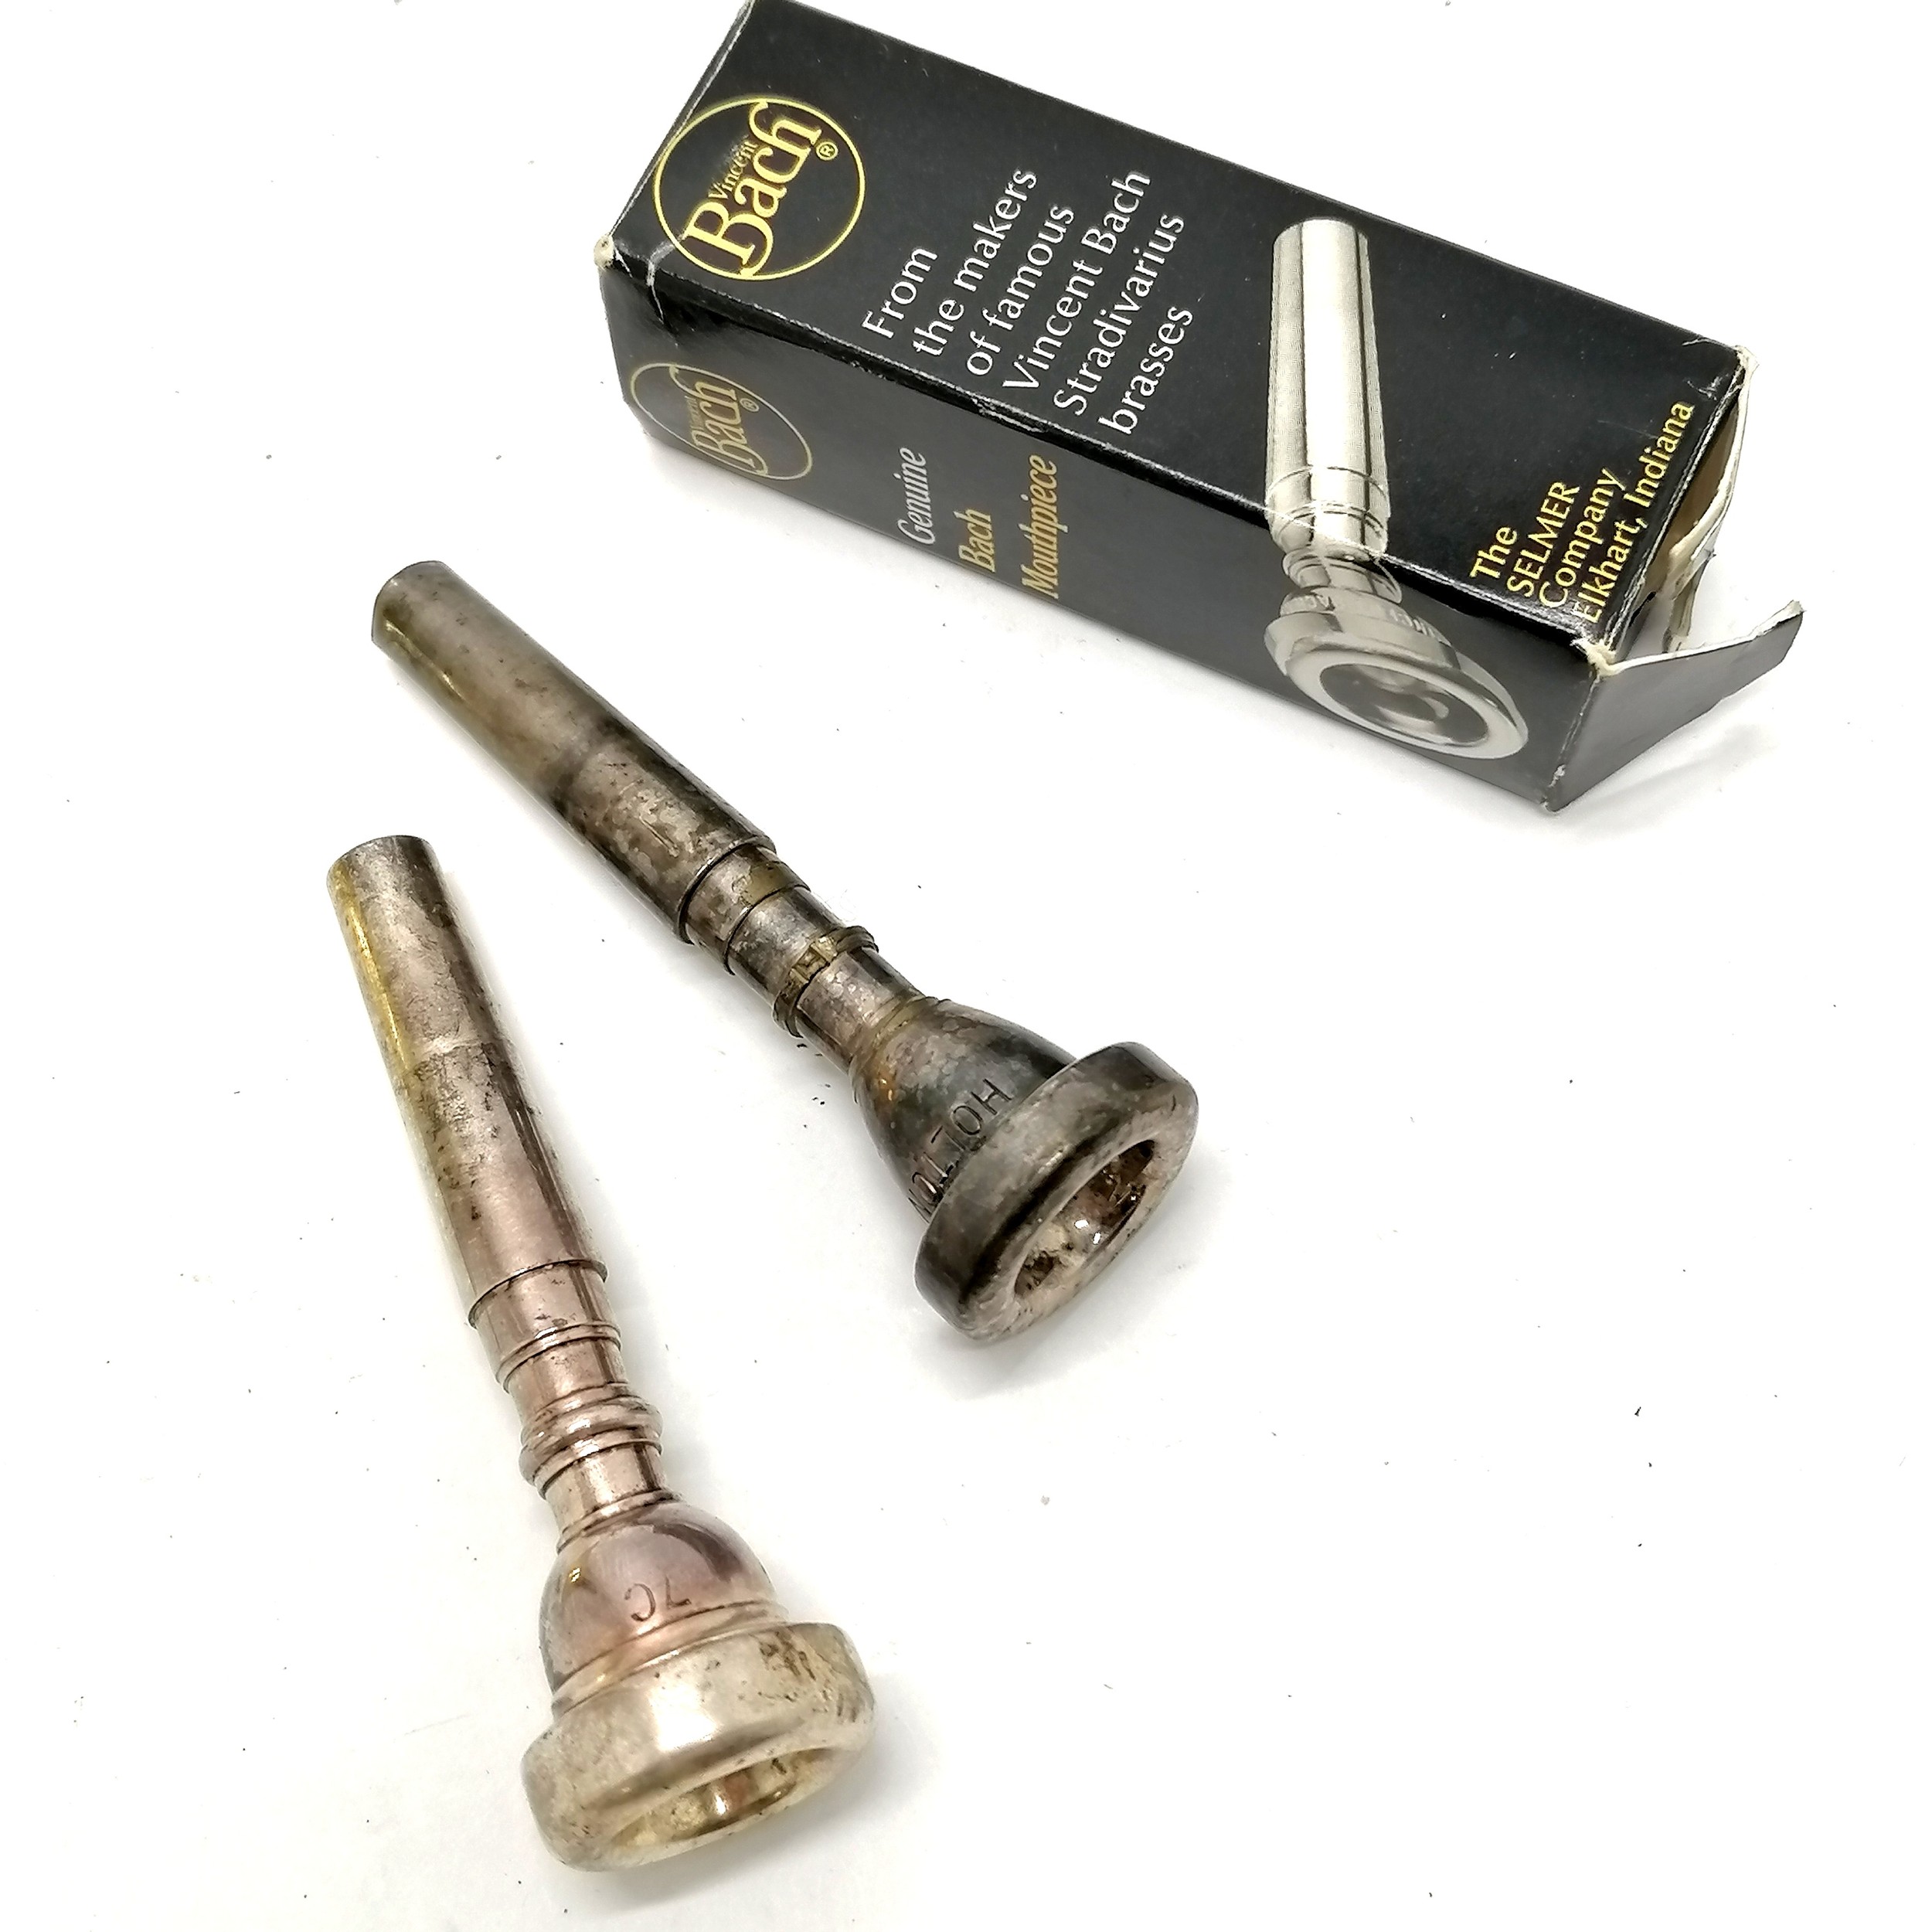 King 600 USA brass trumpet #458 with Holton & 7C mouthpieces in original carry case - Image 3 of 6